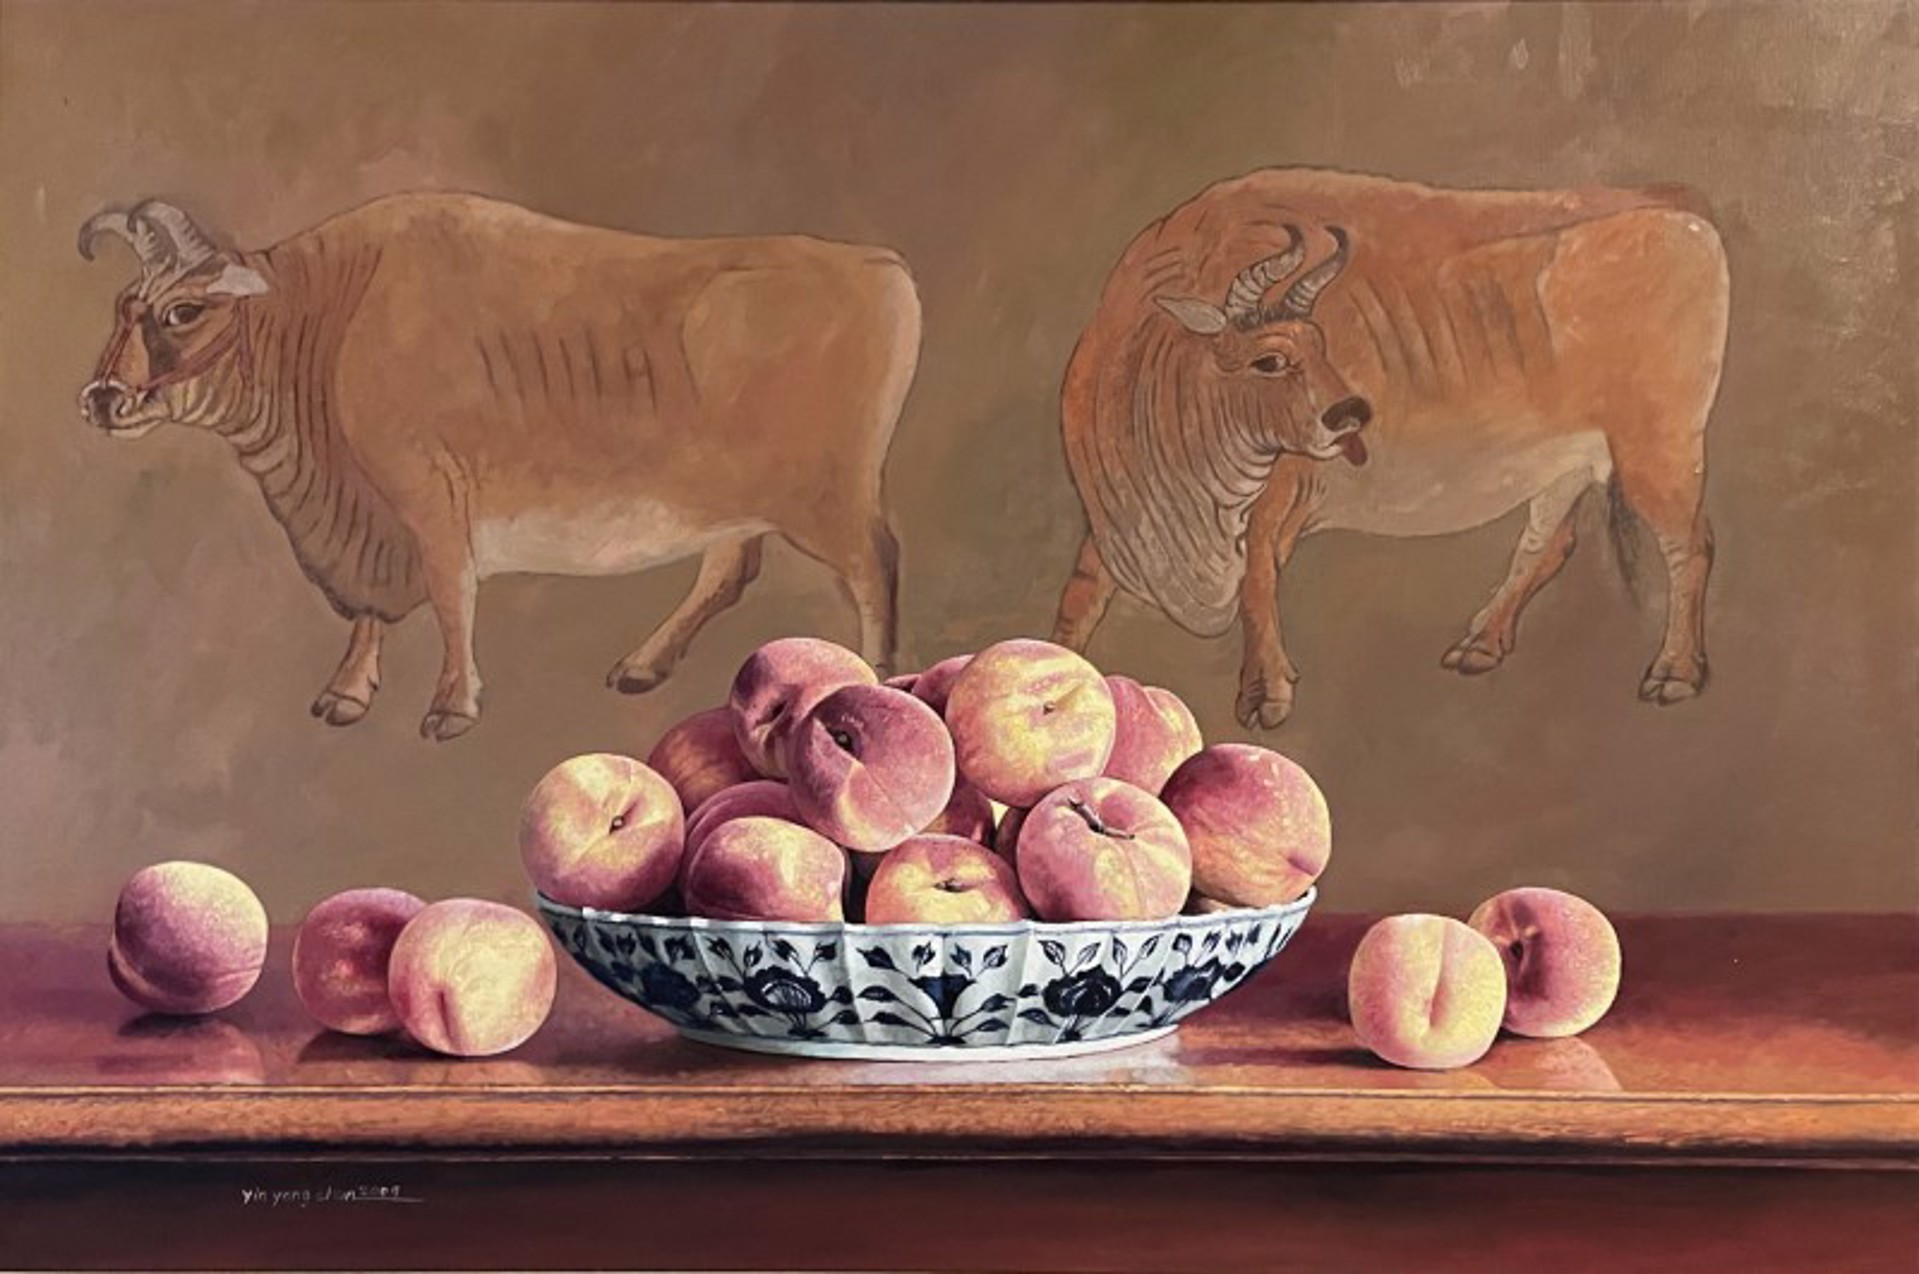 Large Plate of Peaches and Two Ox by Yin Yong Chun